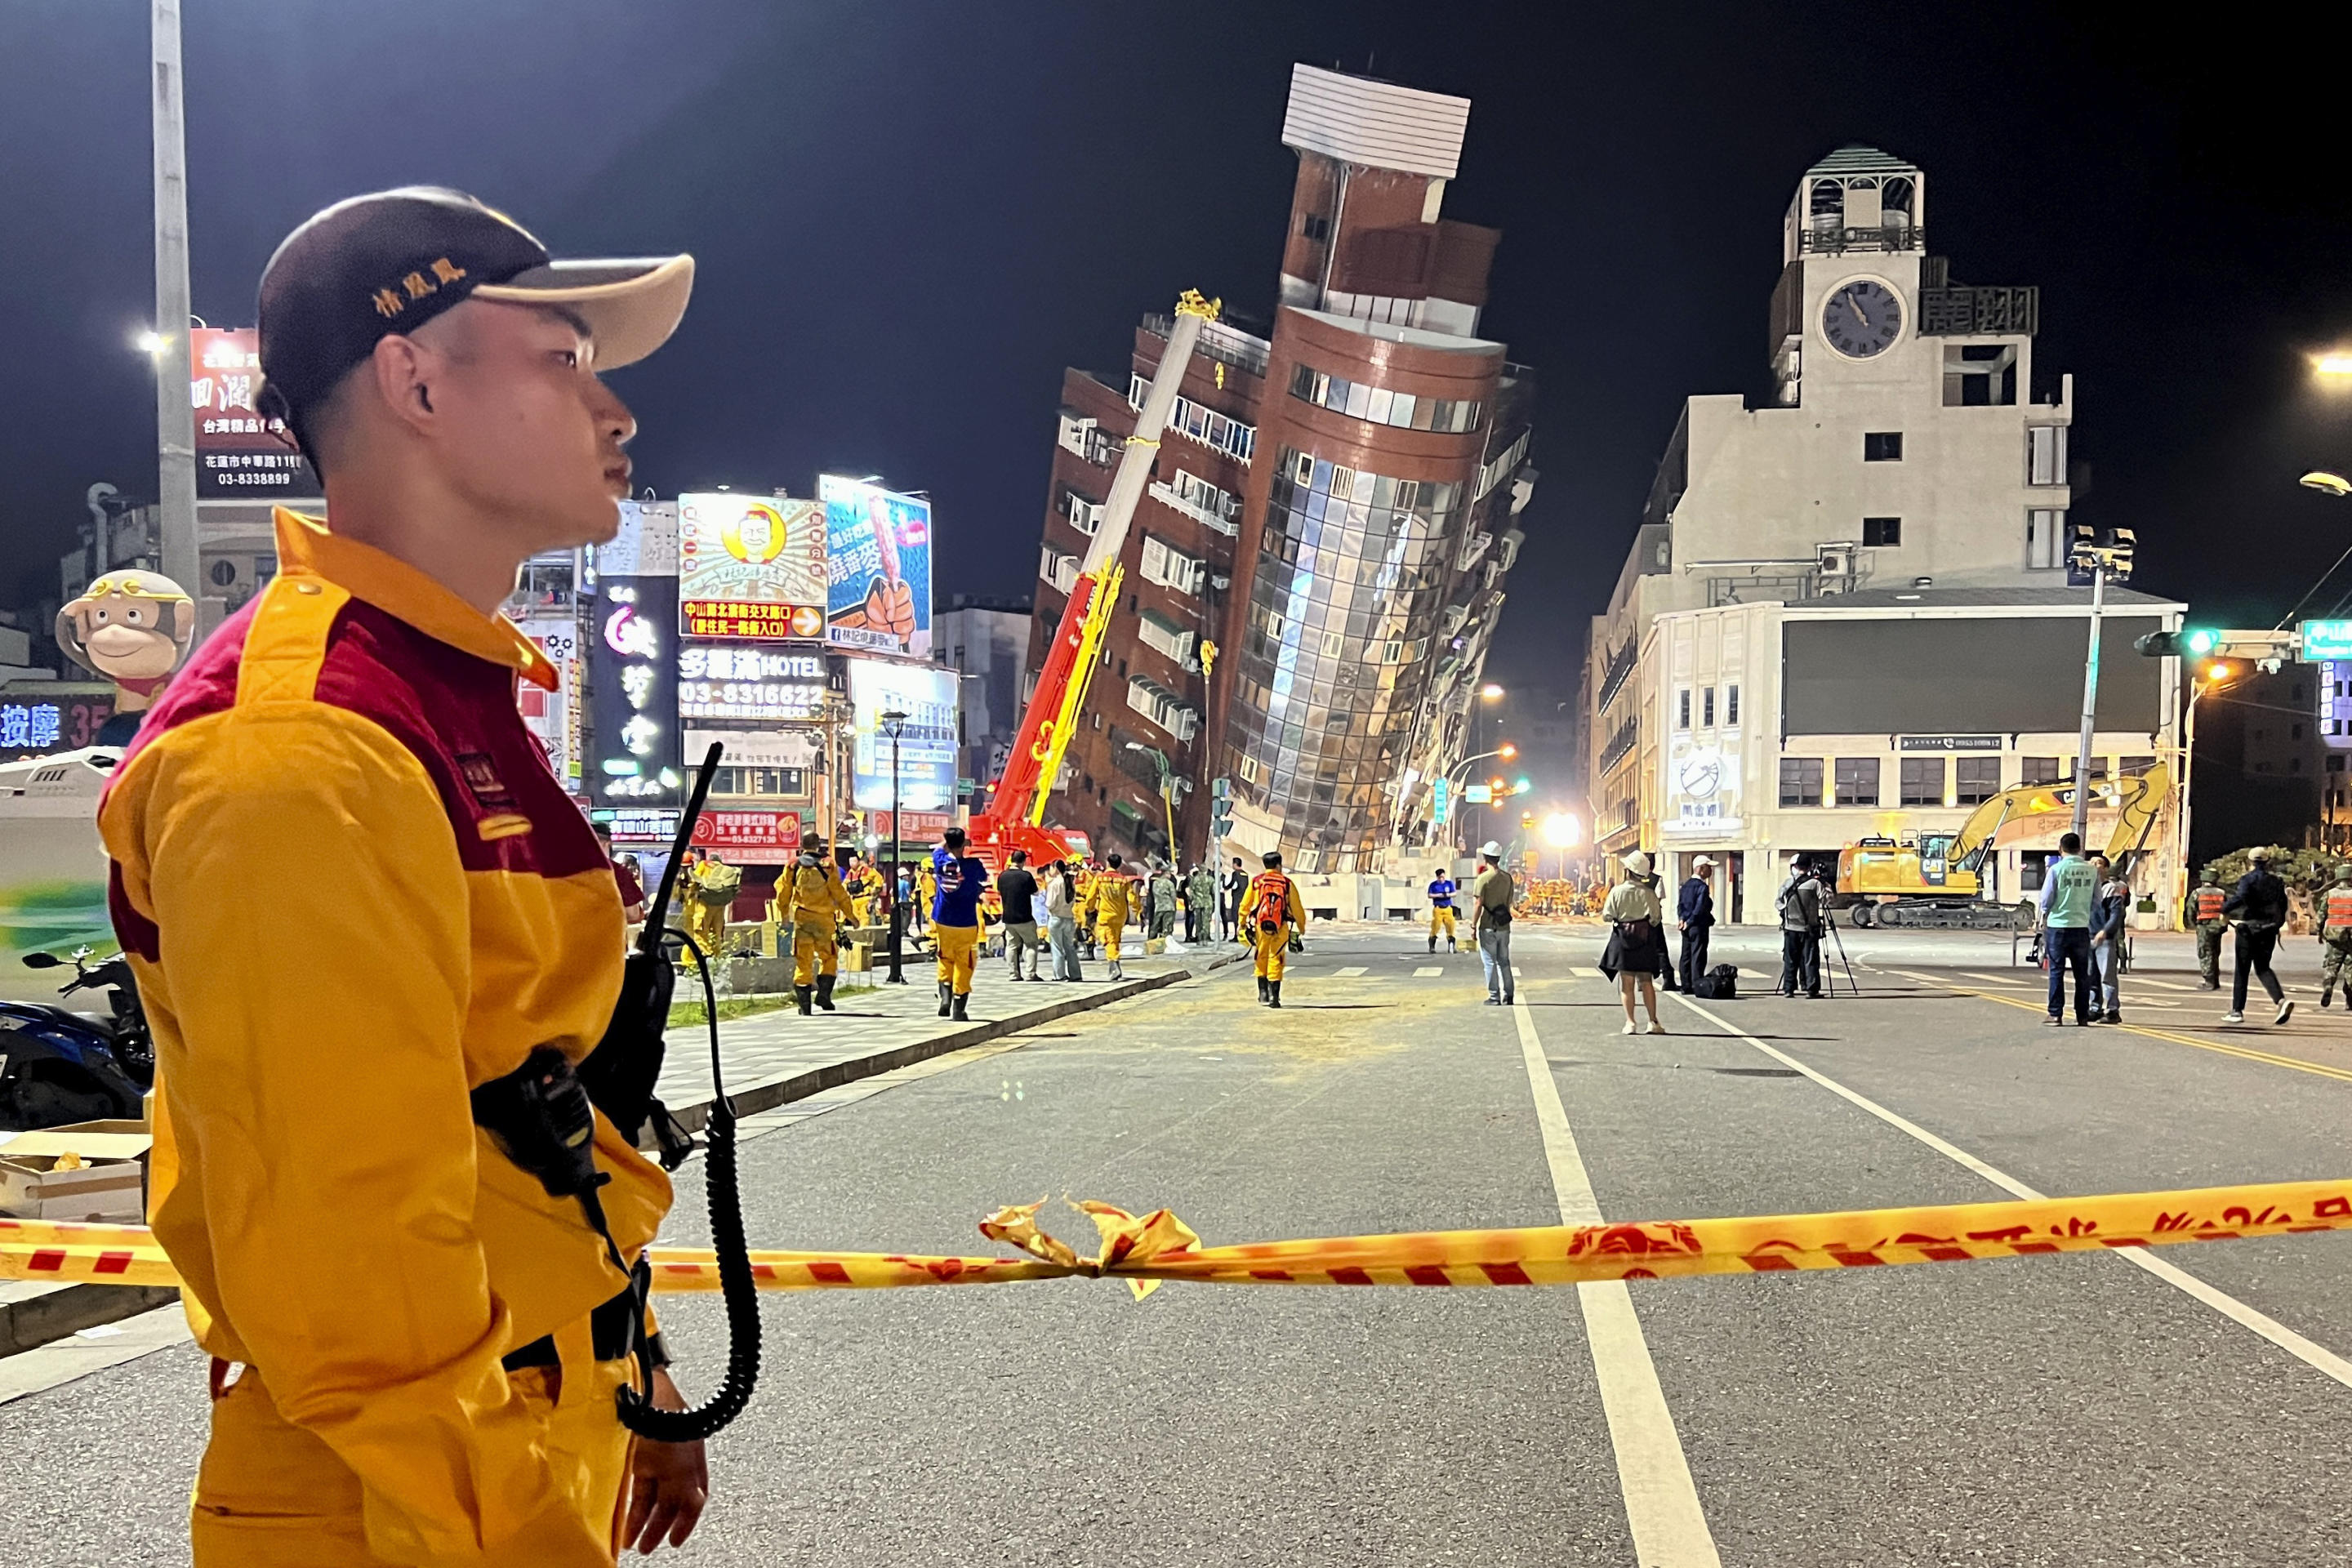 A rescue worker stands near the cordoned off site of a leaning building following the earthquake that struck Hualien City.